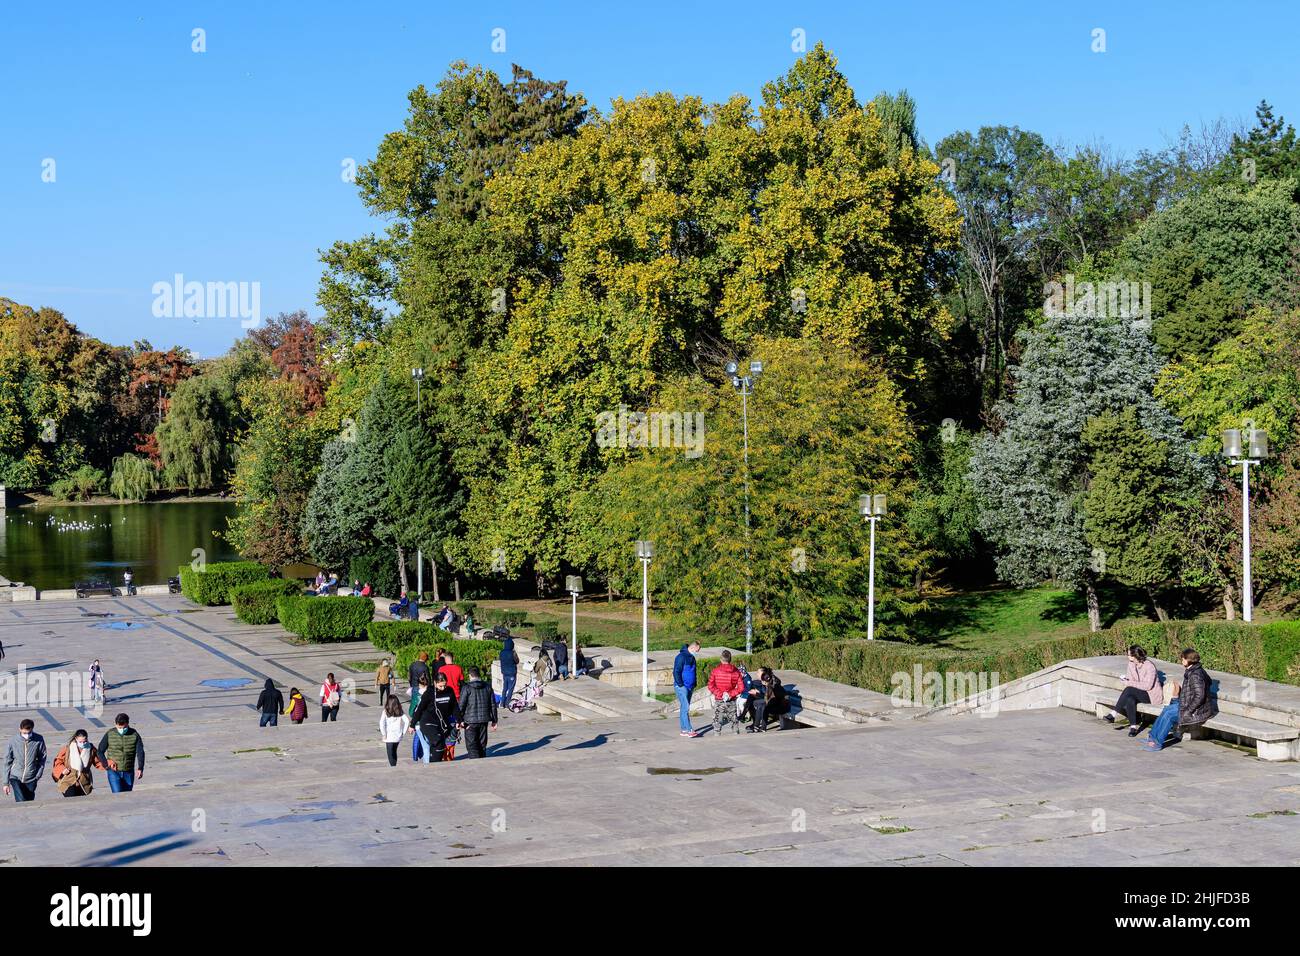 Bucharest, Romania, 1 November 2020: Landscape with the main alley and stairs surrounded by green, yellow, orange and brown leaves on large old trees Stock Photo